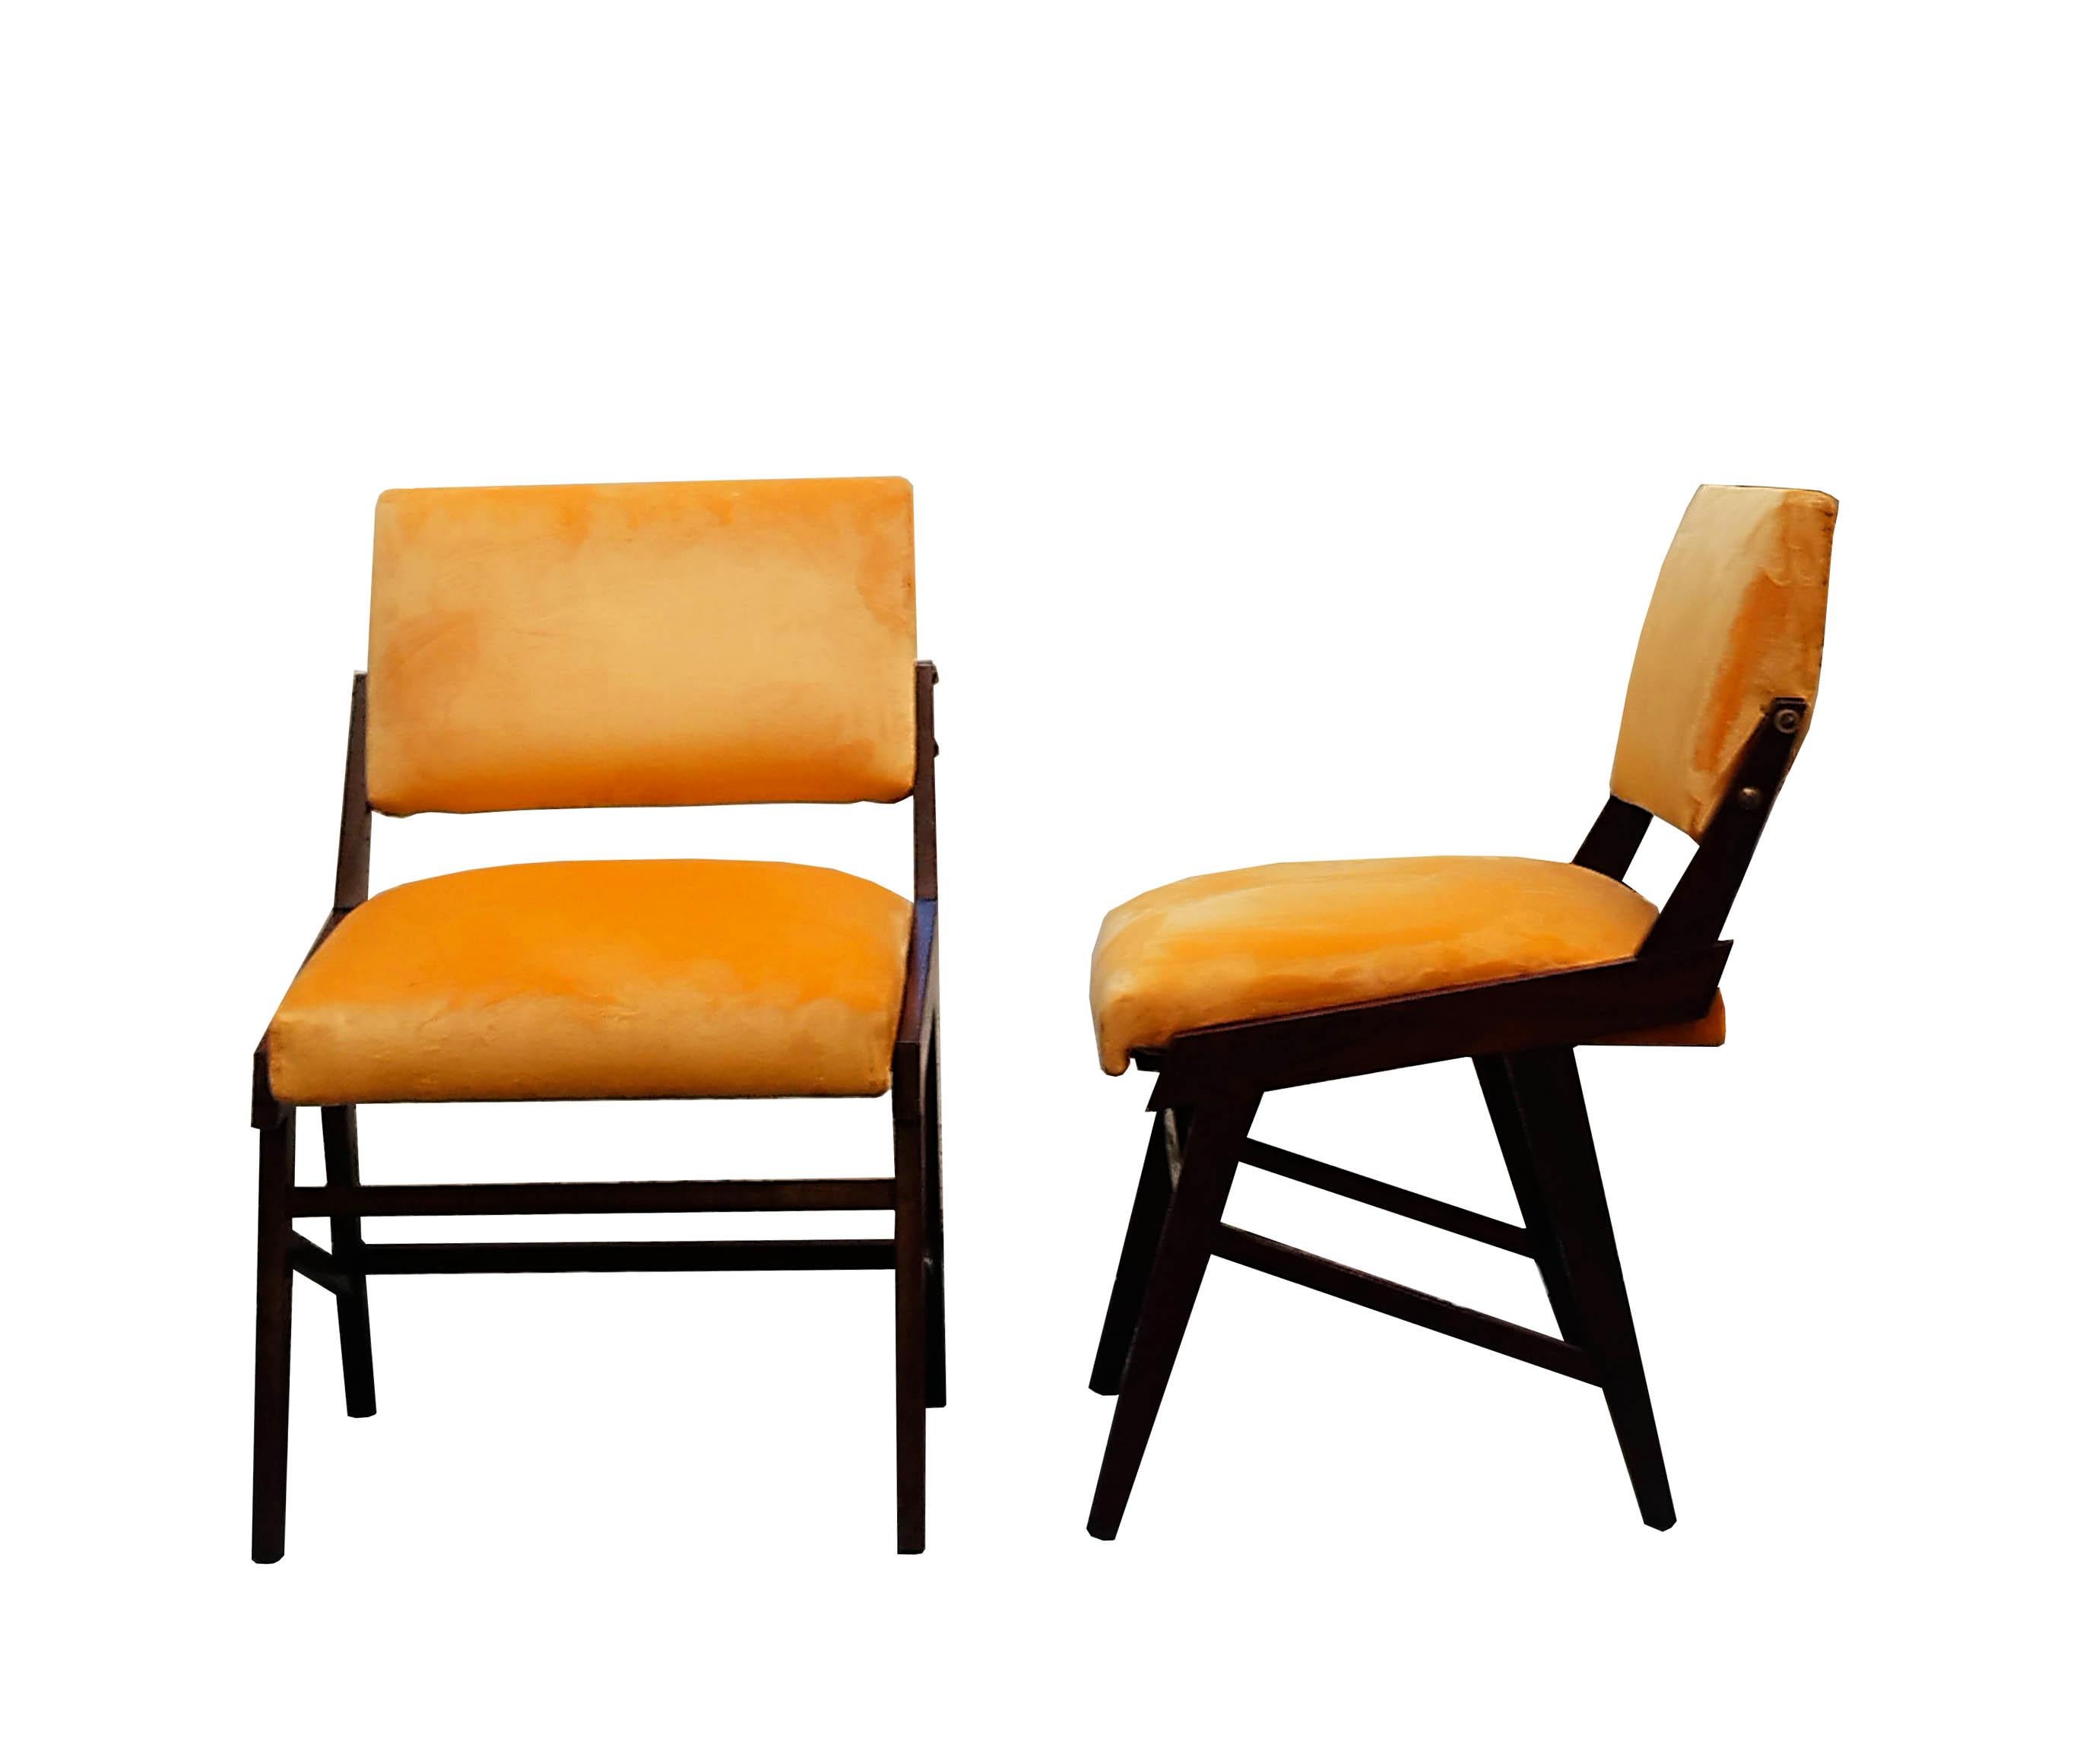 Mid-Century Modern Ico Parisi Style Pair of Wood and Velvet Chairs, Italy 1960s For Sale